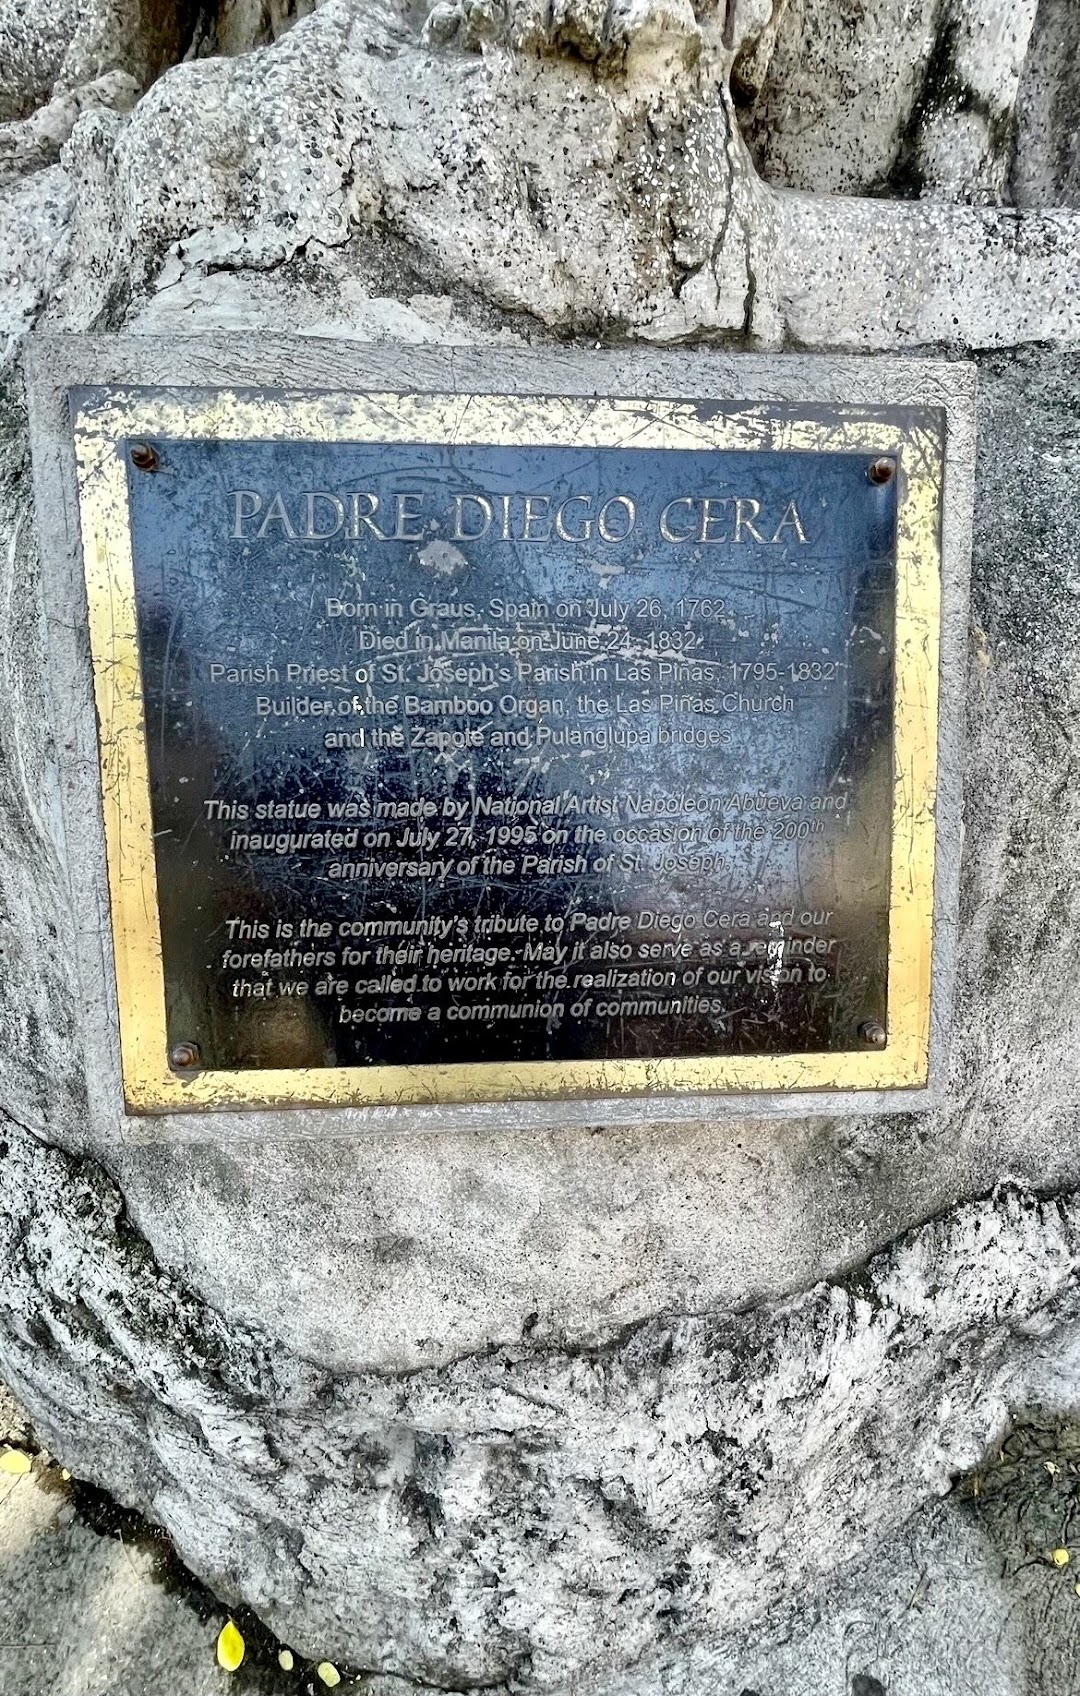 Father Diego Cera Monument and Historical Marker